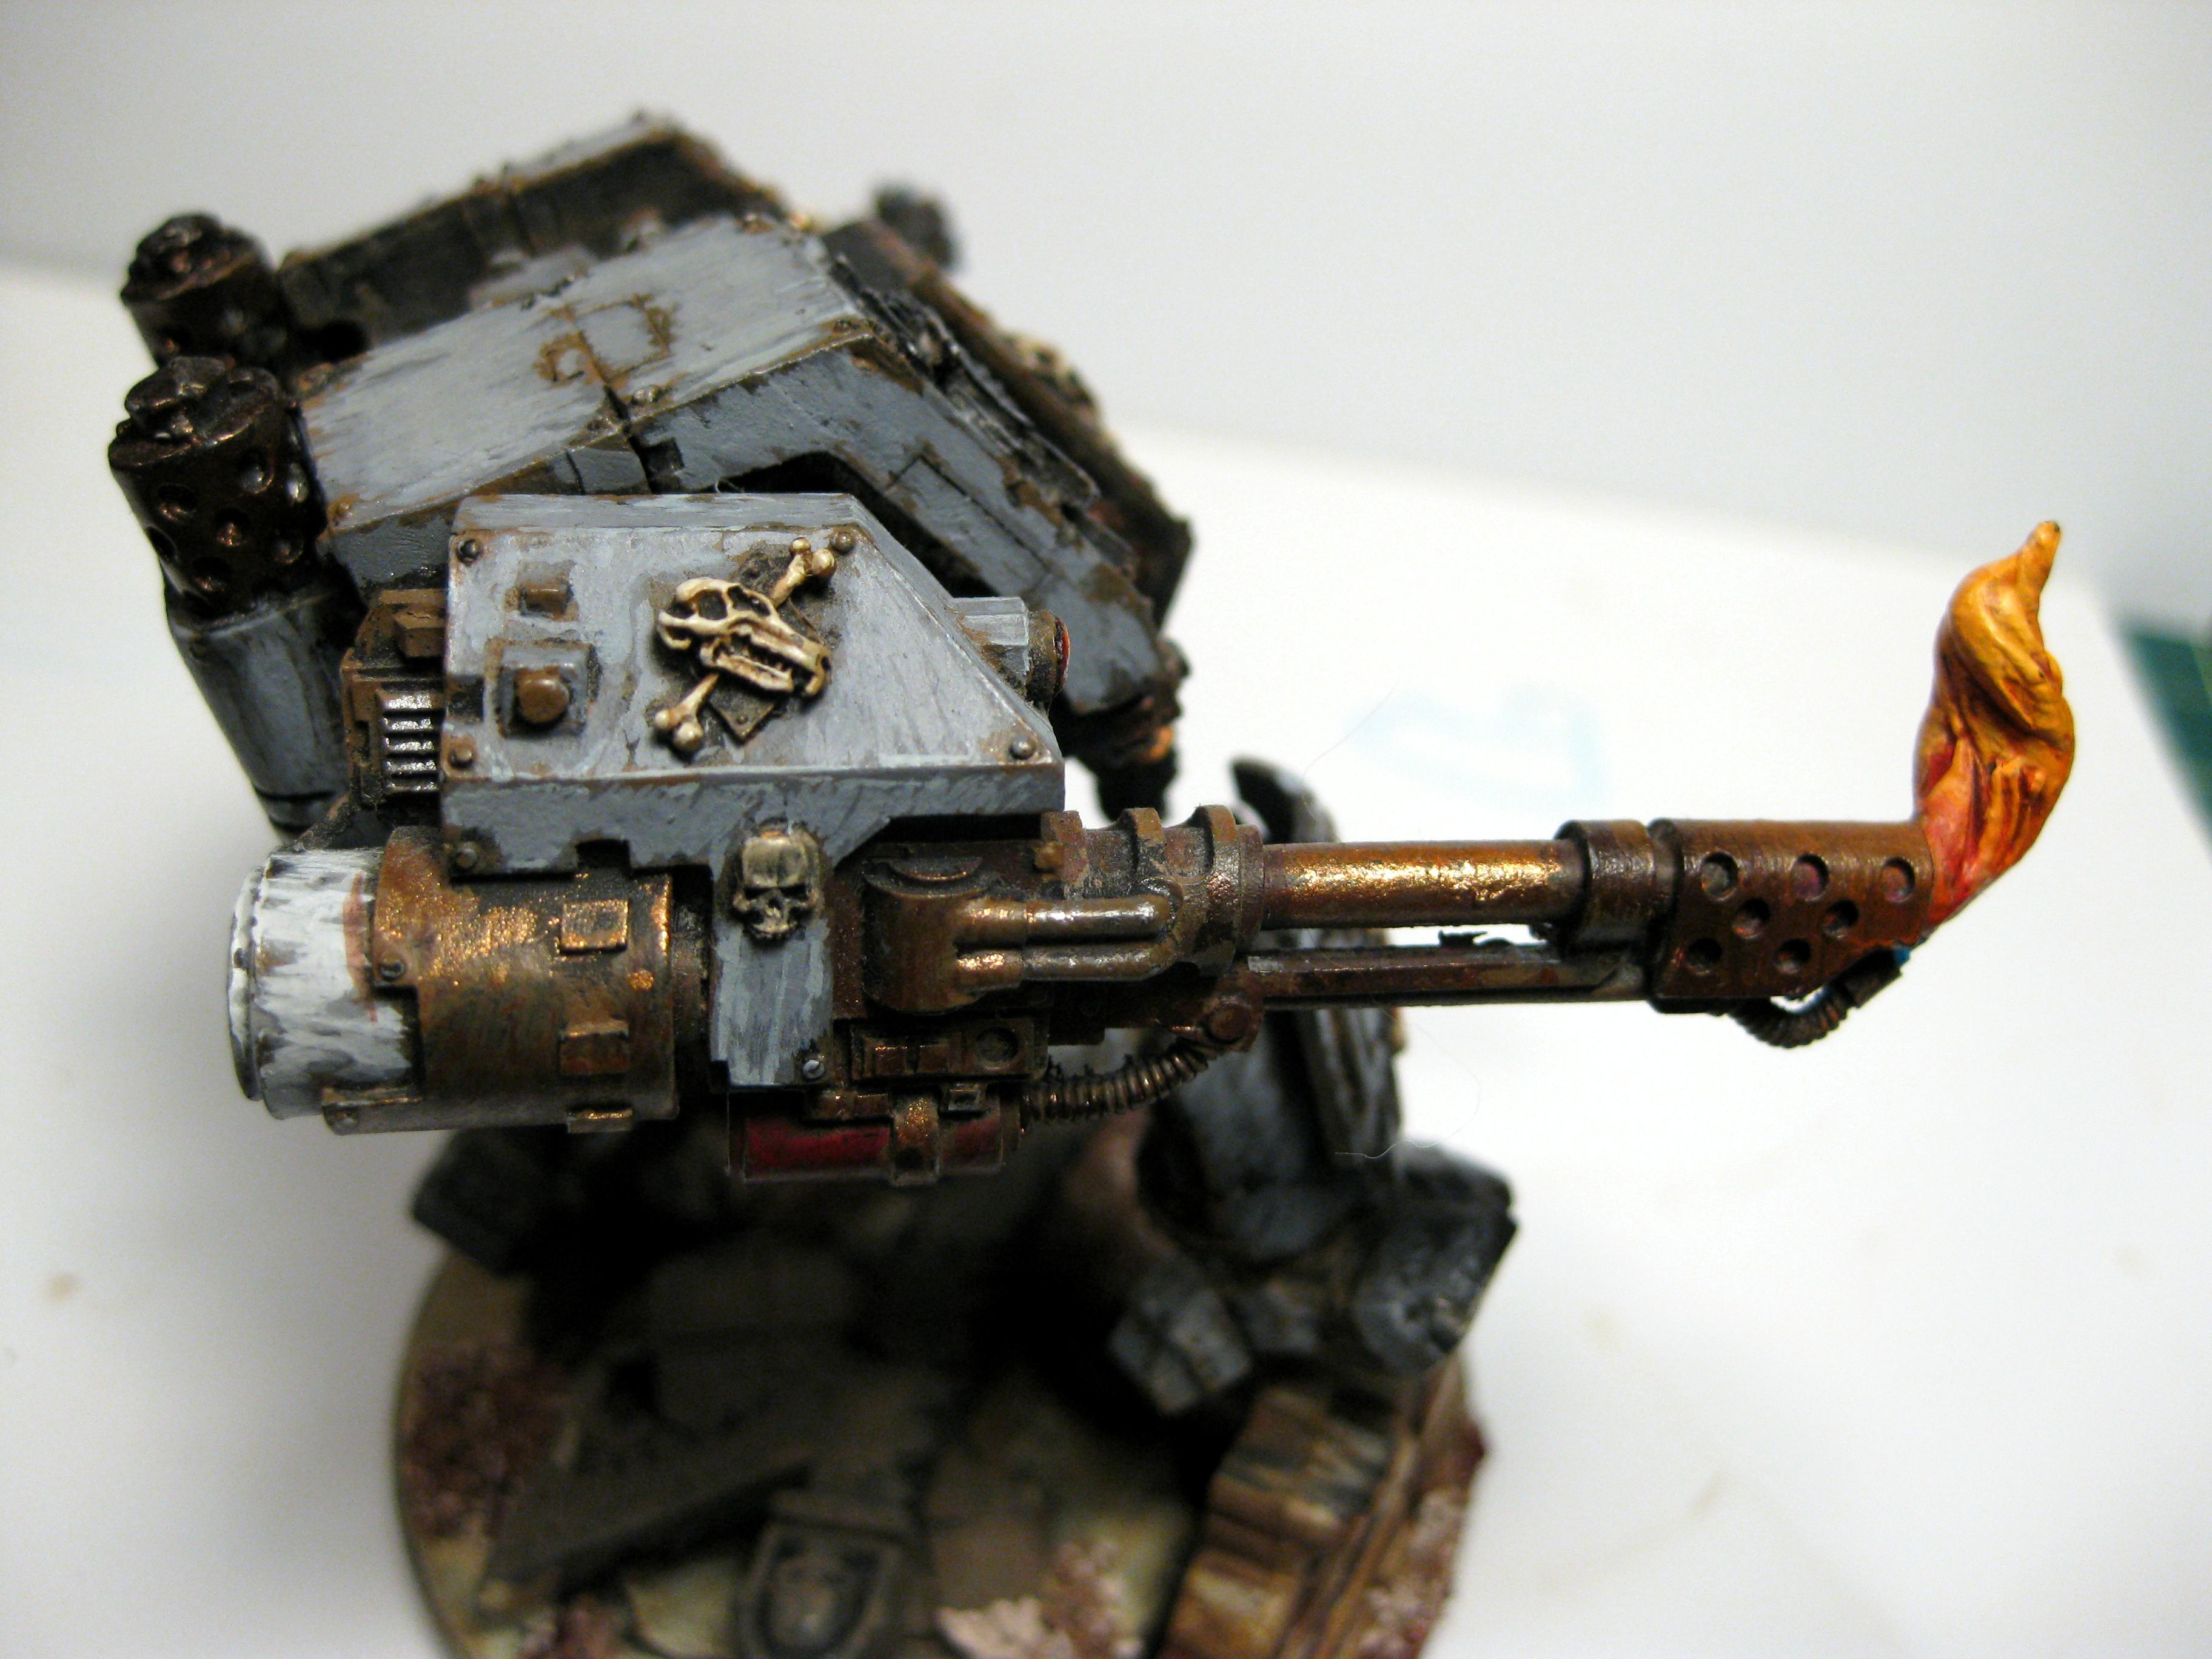 Dreadnought, Flamer, Flames, Space Marines, Space Wolves, Warhammer 40,000